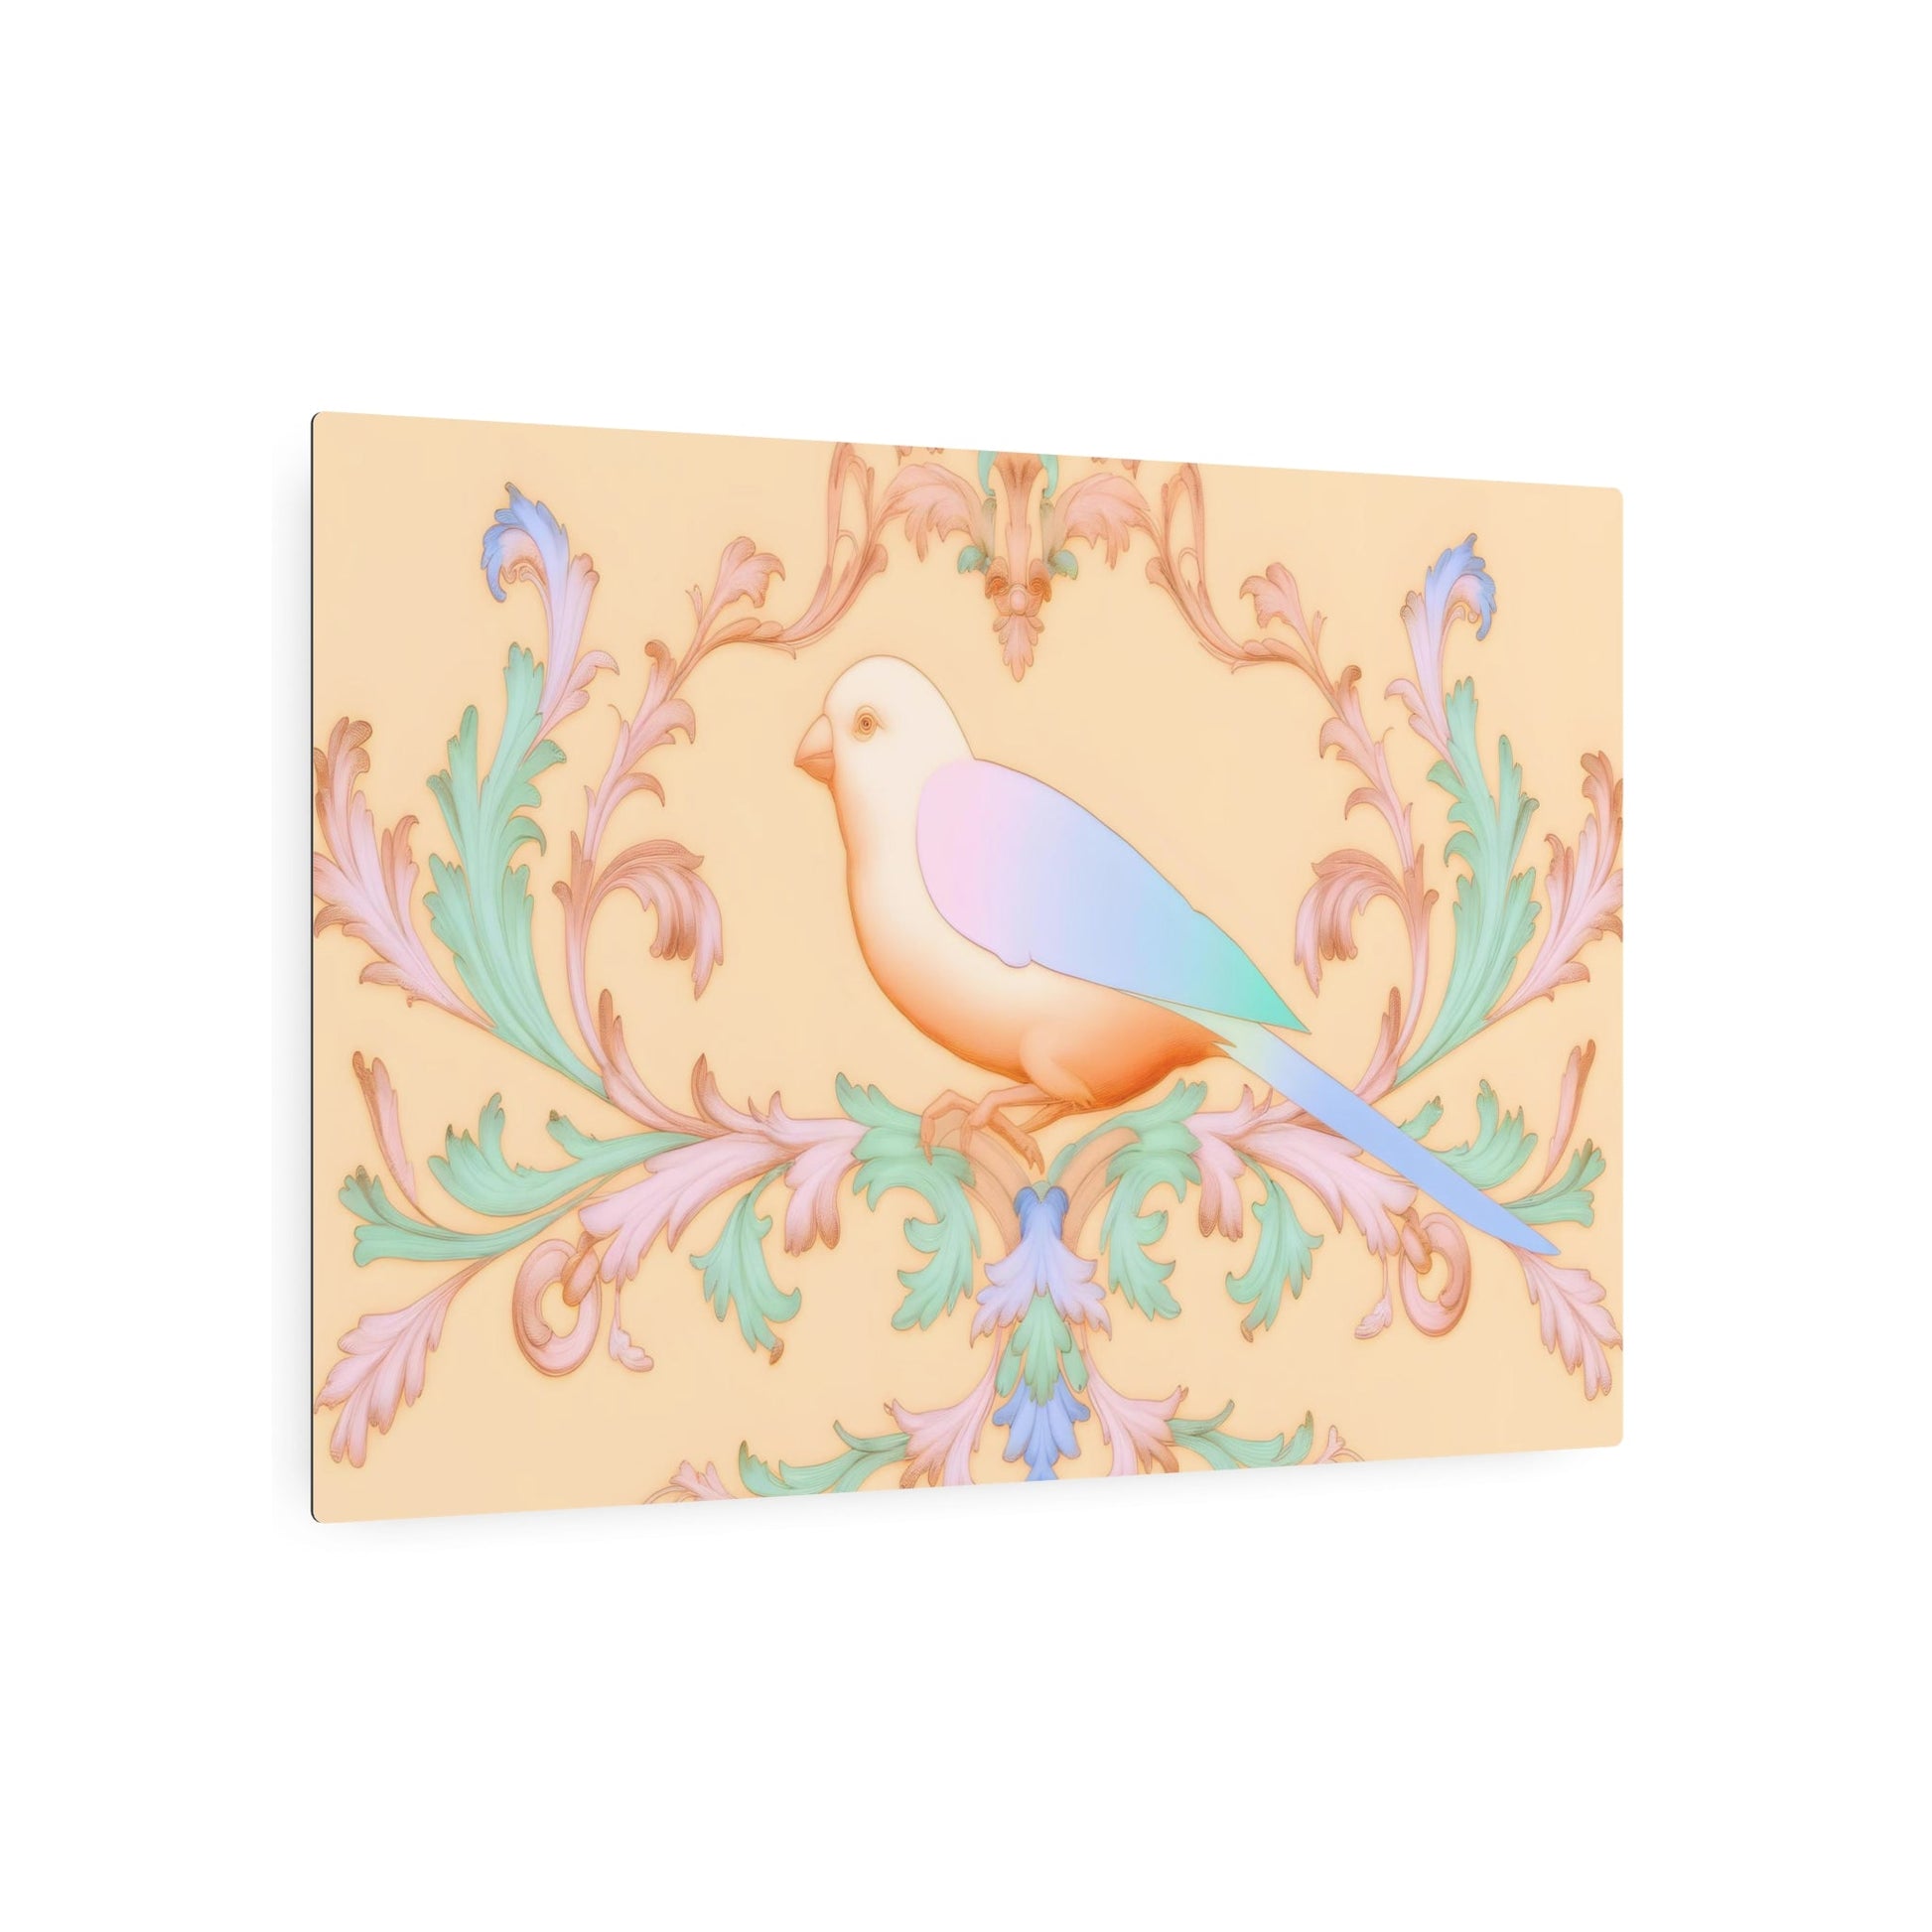 Metal Poster Art | "Rococo Style Bird Artwork - Western Art Styles: Intricate Pastel Palette Design with Delicate Detailing in Rococo Tradition" - Metal Poster Art 36″ x 24″ (Horizontal) 0.12''